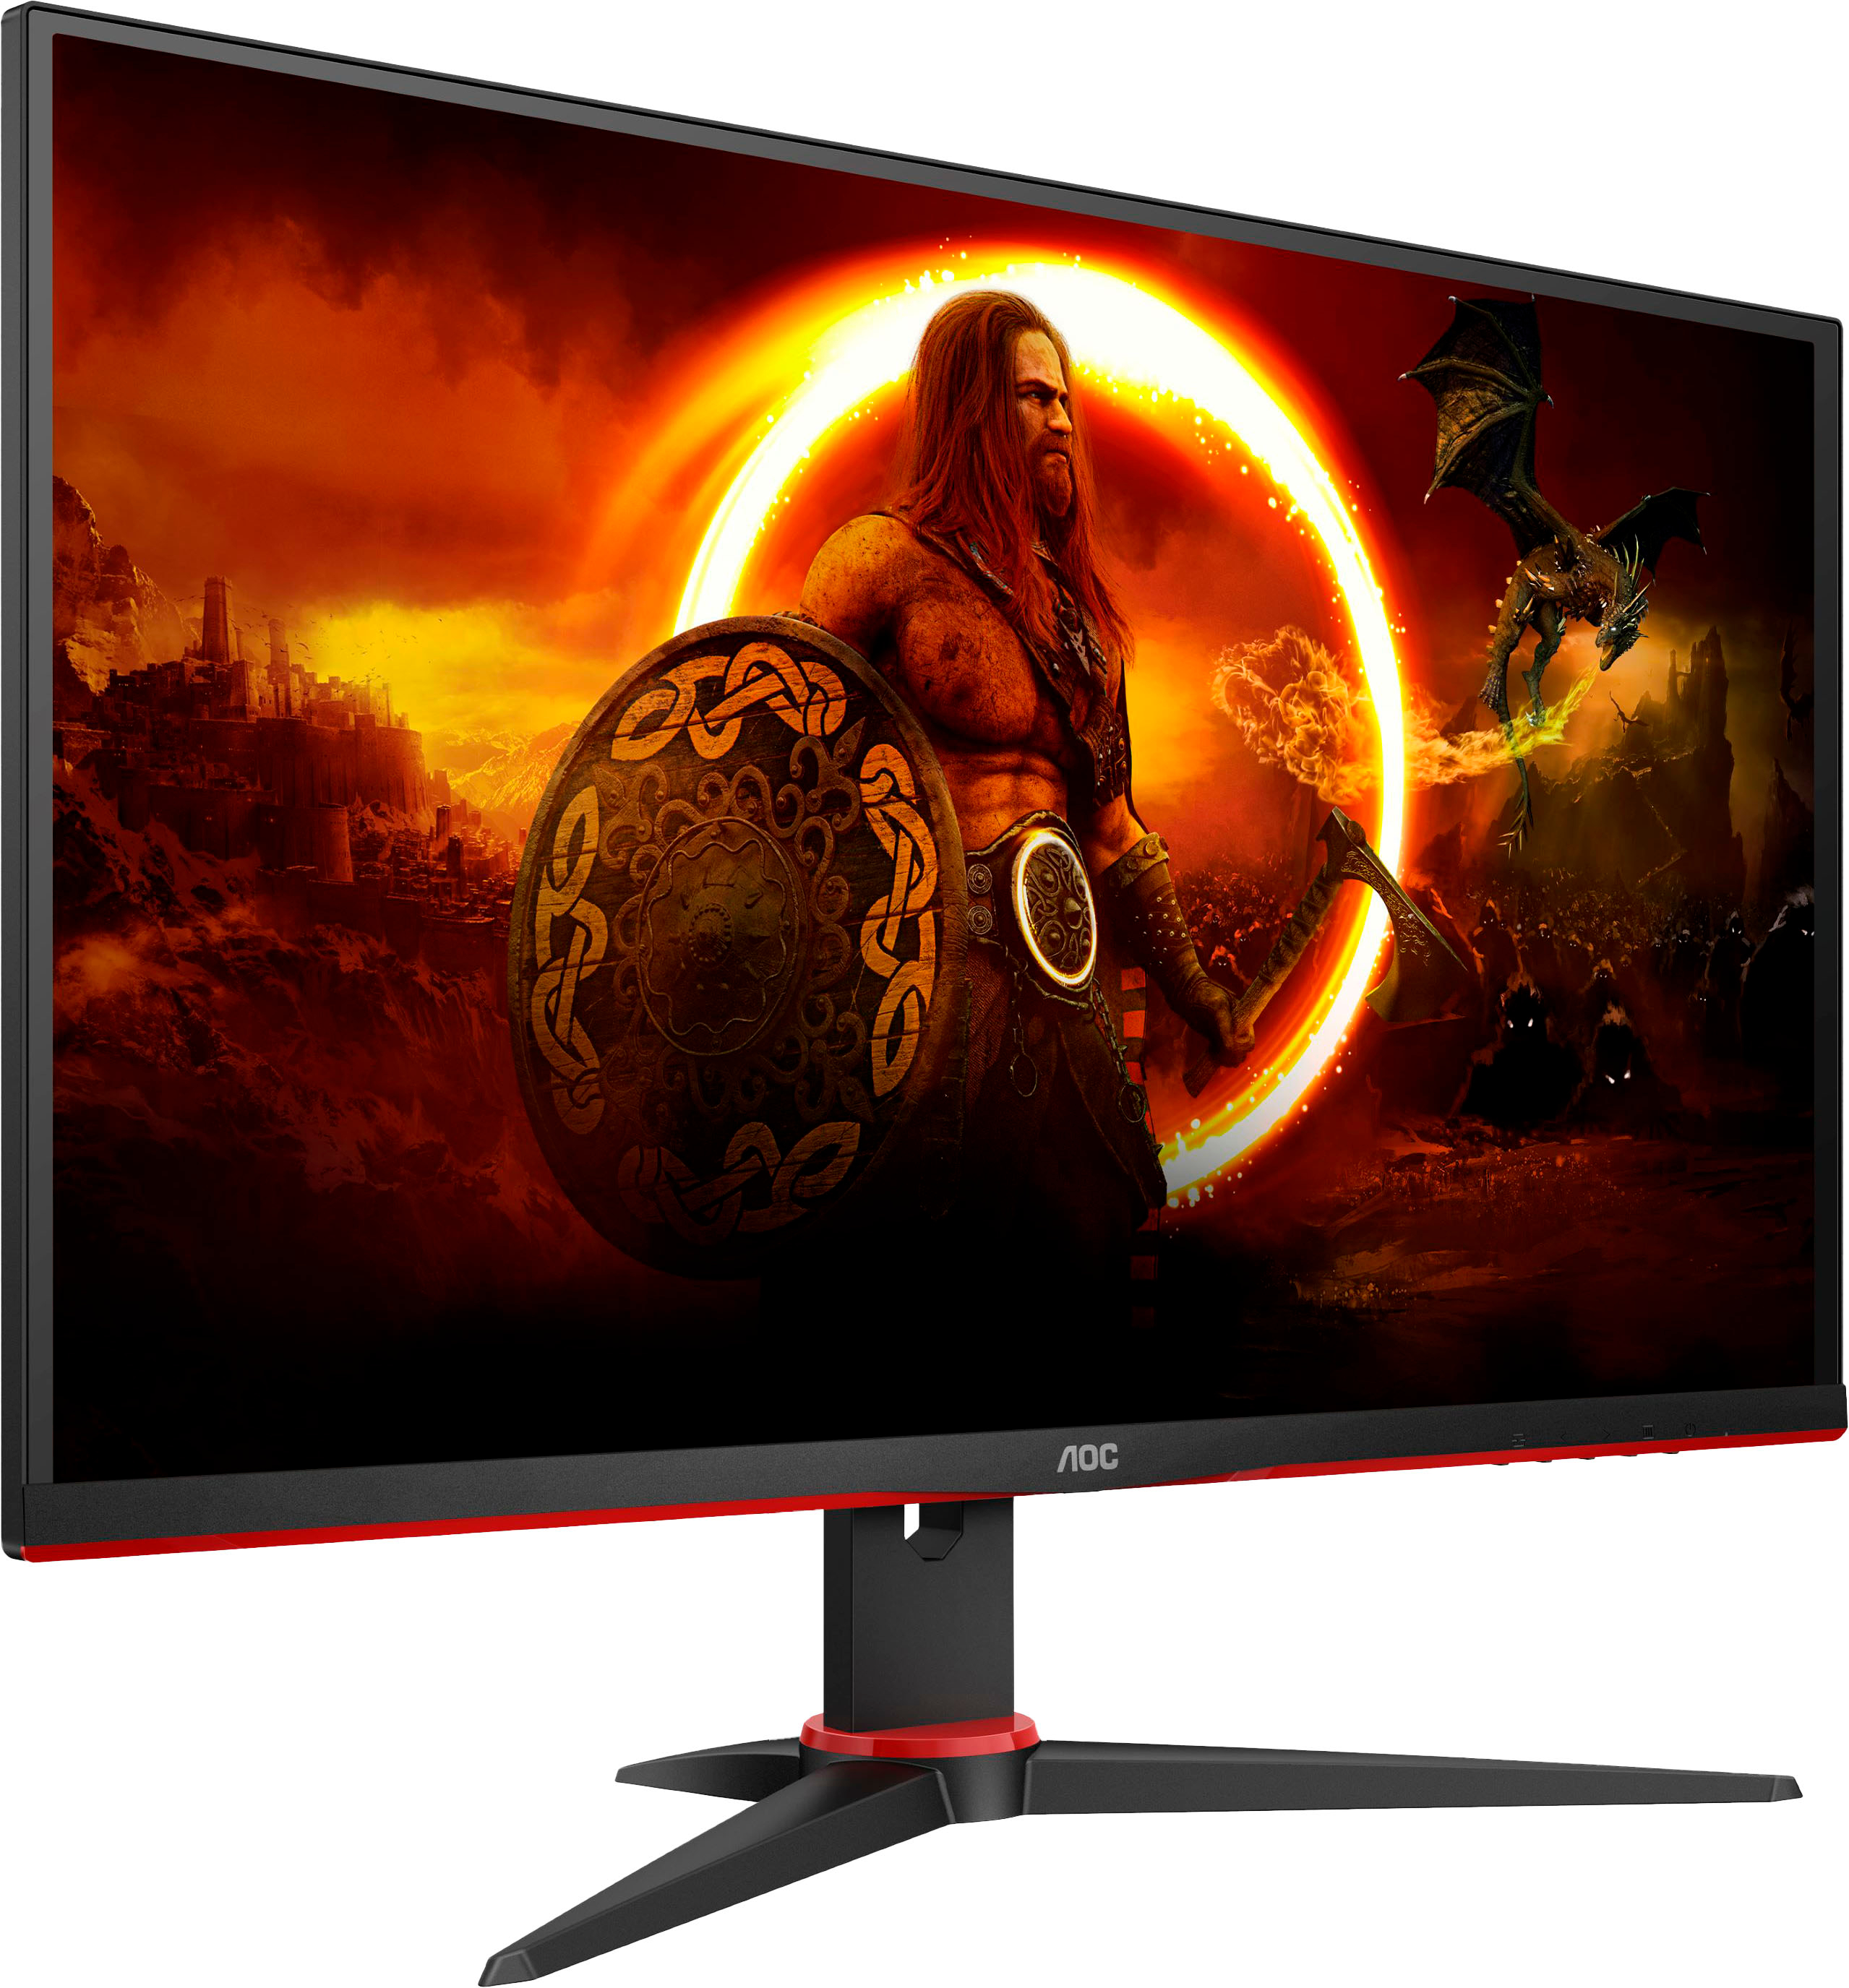 Angle View: AOC - 24G2SPE 23.8" LCD FHD Gaming Monitor - Black/Red